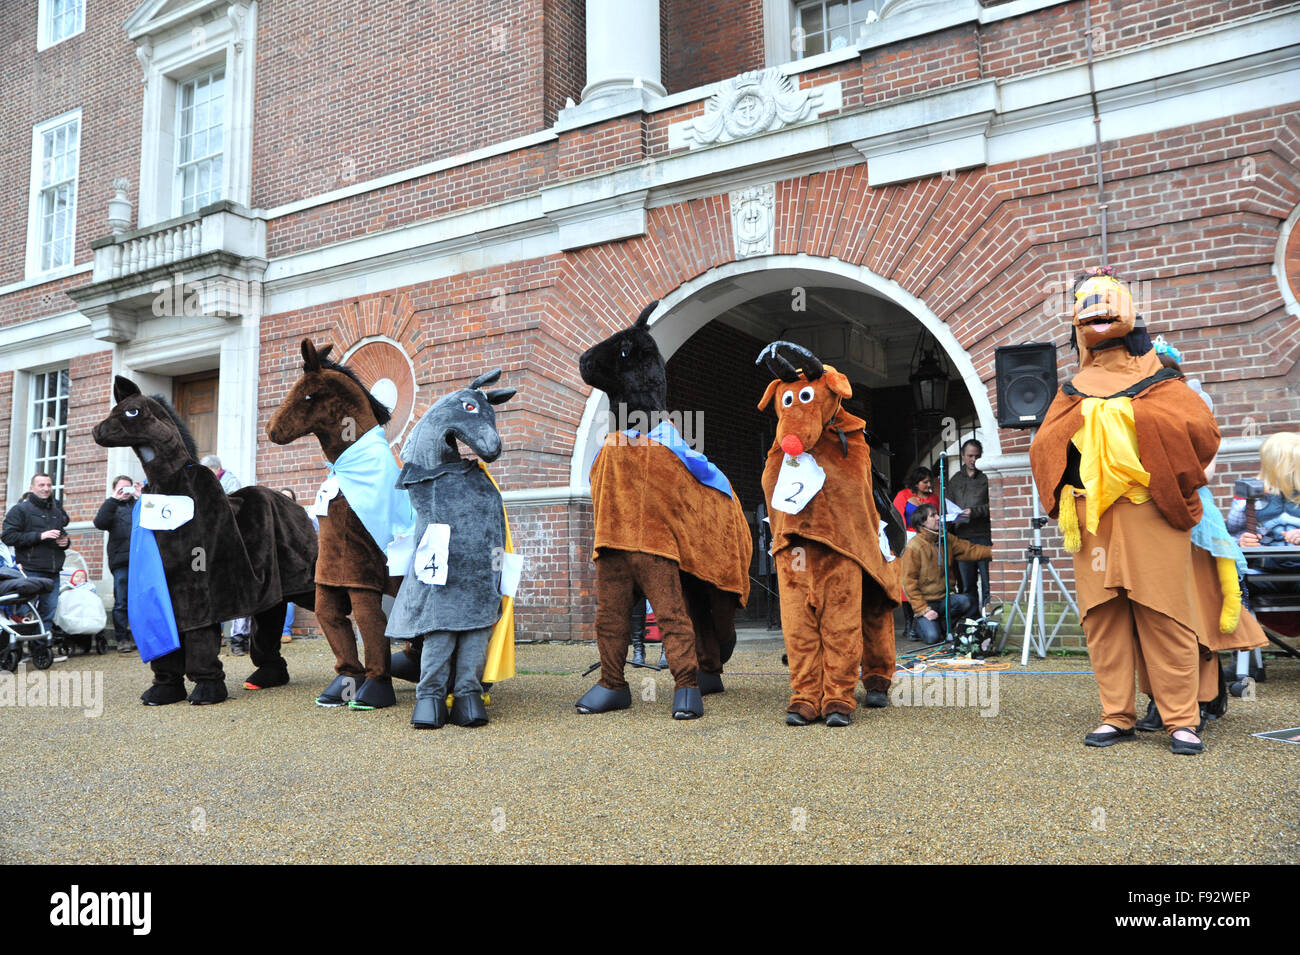 Greenwich, London, UK. 13th December 2015. The annual Pantomime Horse ...